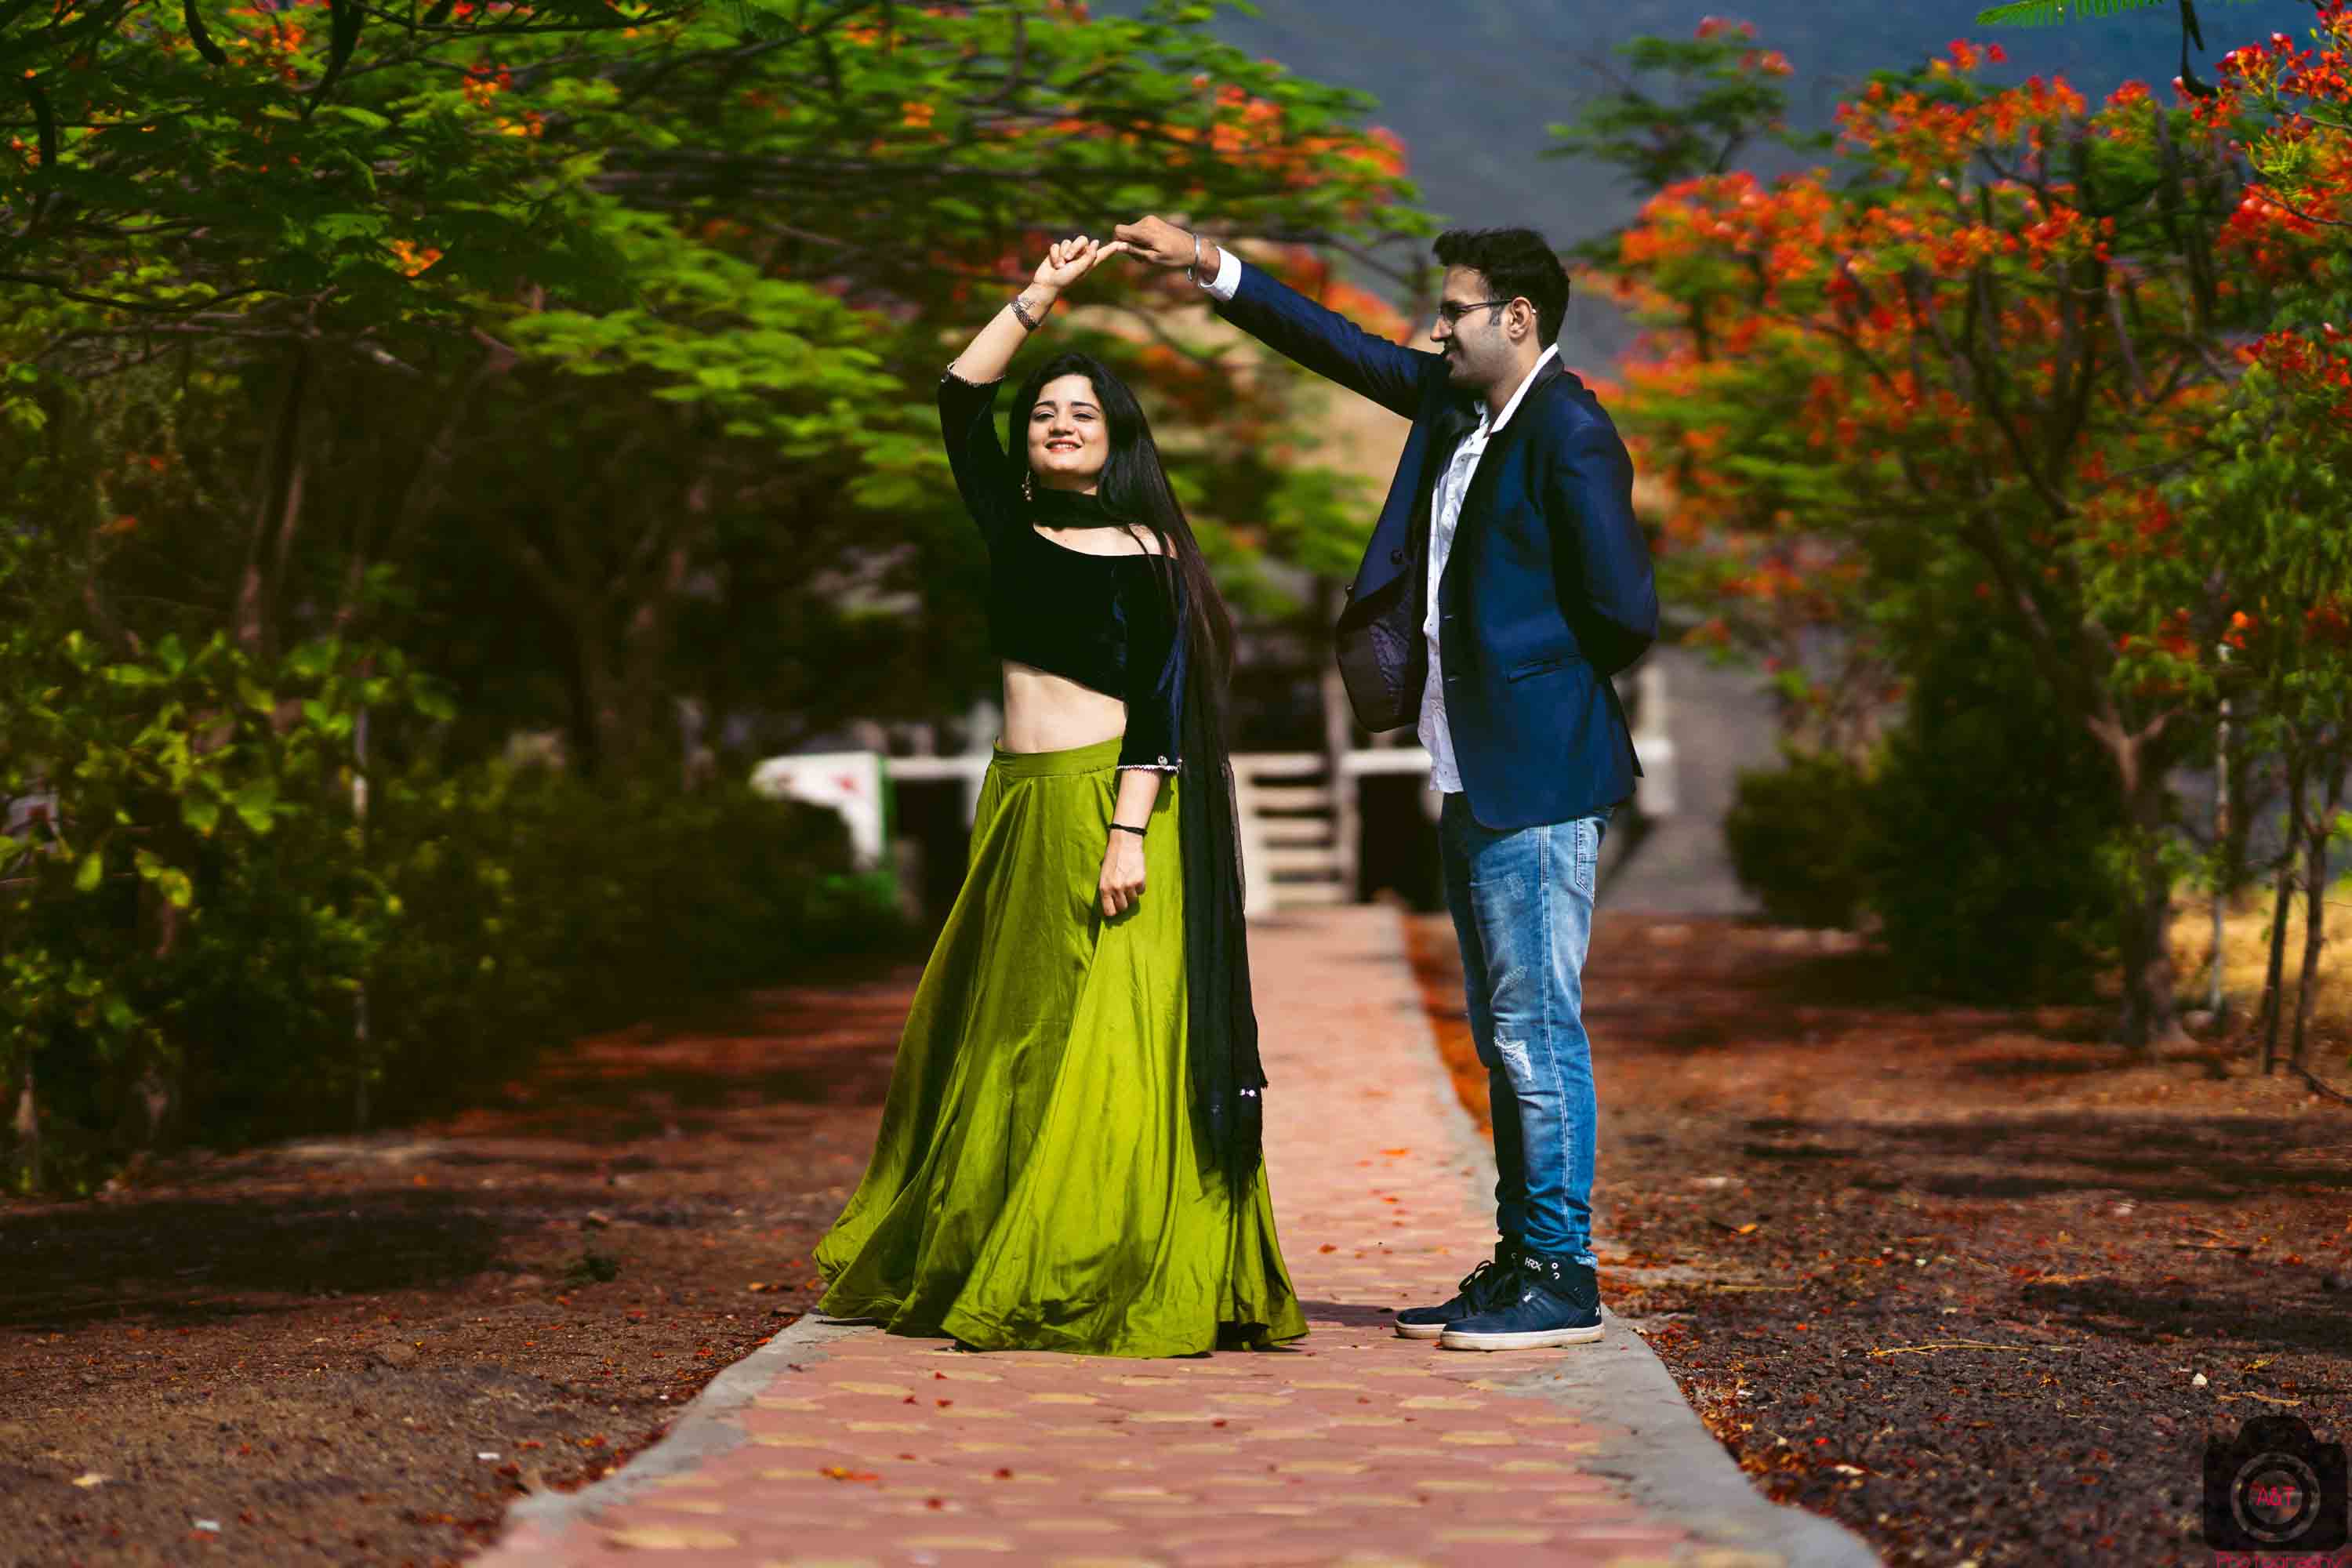 Twirling Pose from Best Pre-wedding photoshoot of Shilpa & Pulkit done by A&T Photography